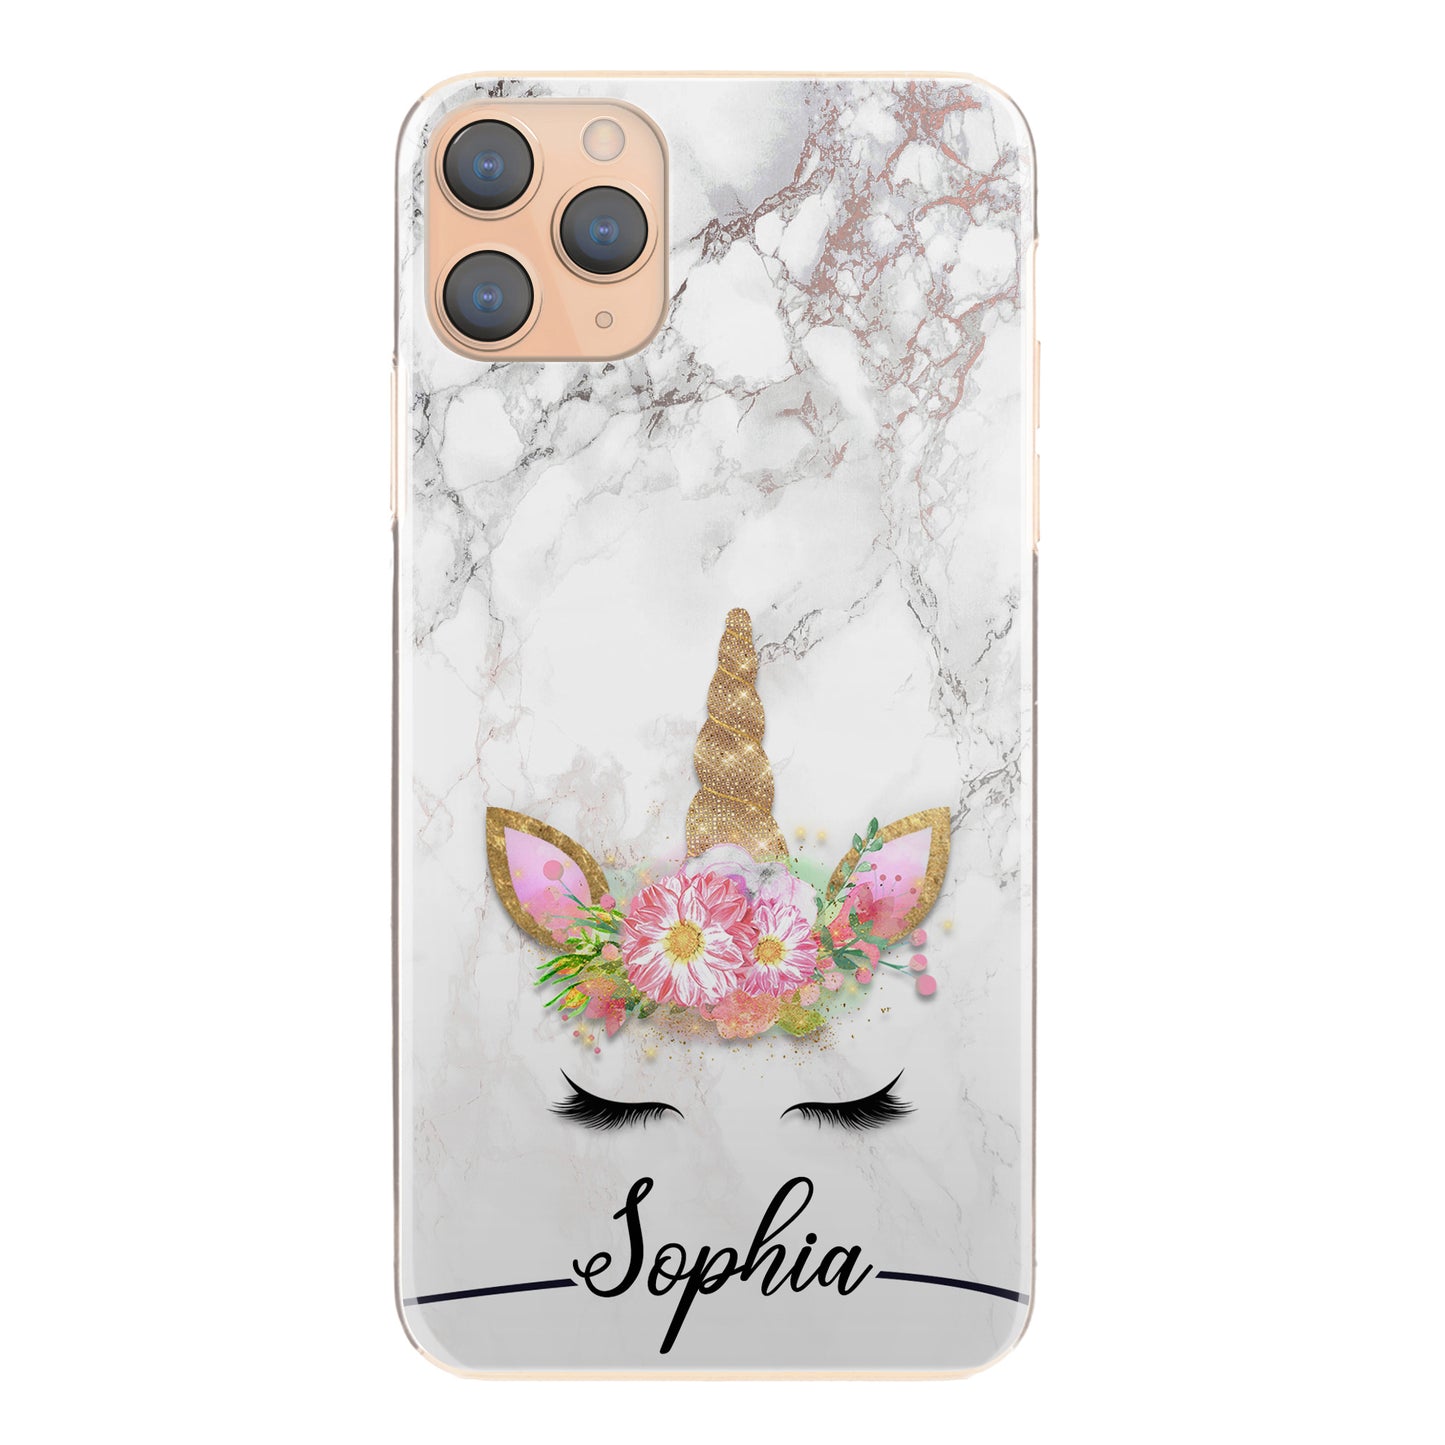 Personalised LG Phone Hard Case with Gold Floral Unicorn and Text on Grey Marble